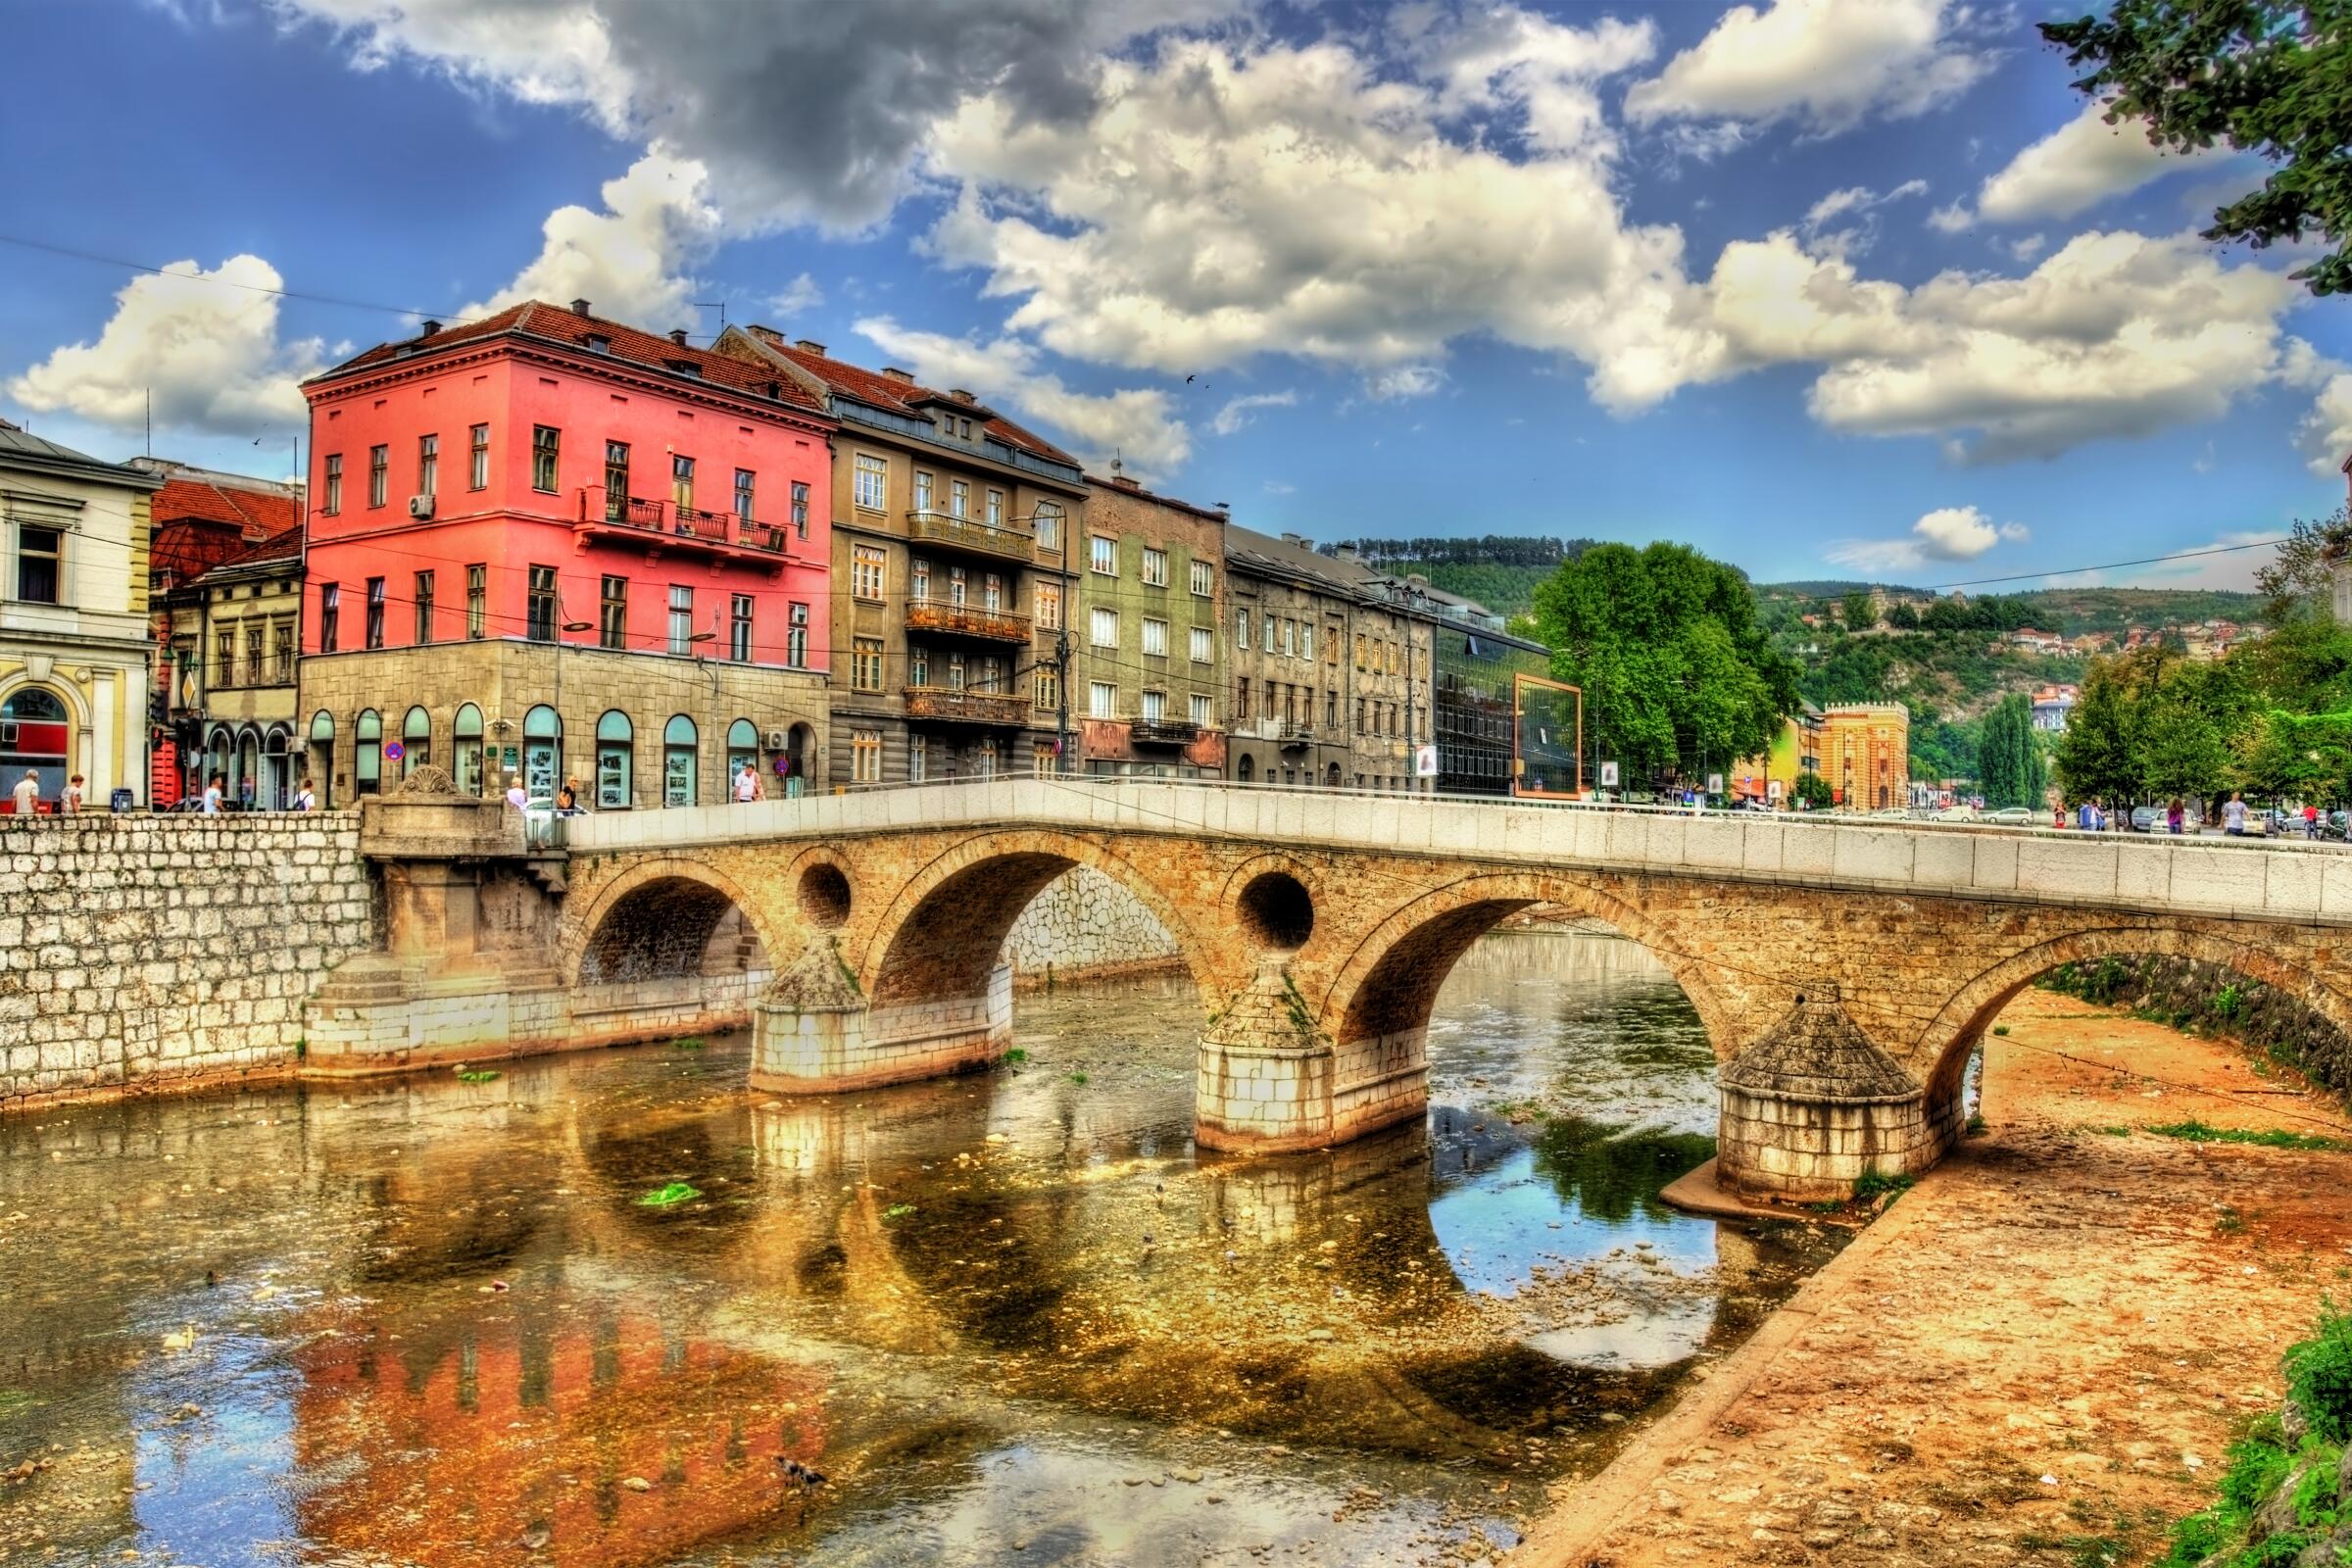 The Latin Bridge is one of many crossings along the Miljacka River in Sarajevo, Bosnia-Herzegovina, whose old quarter has buildings that date back centuries.